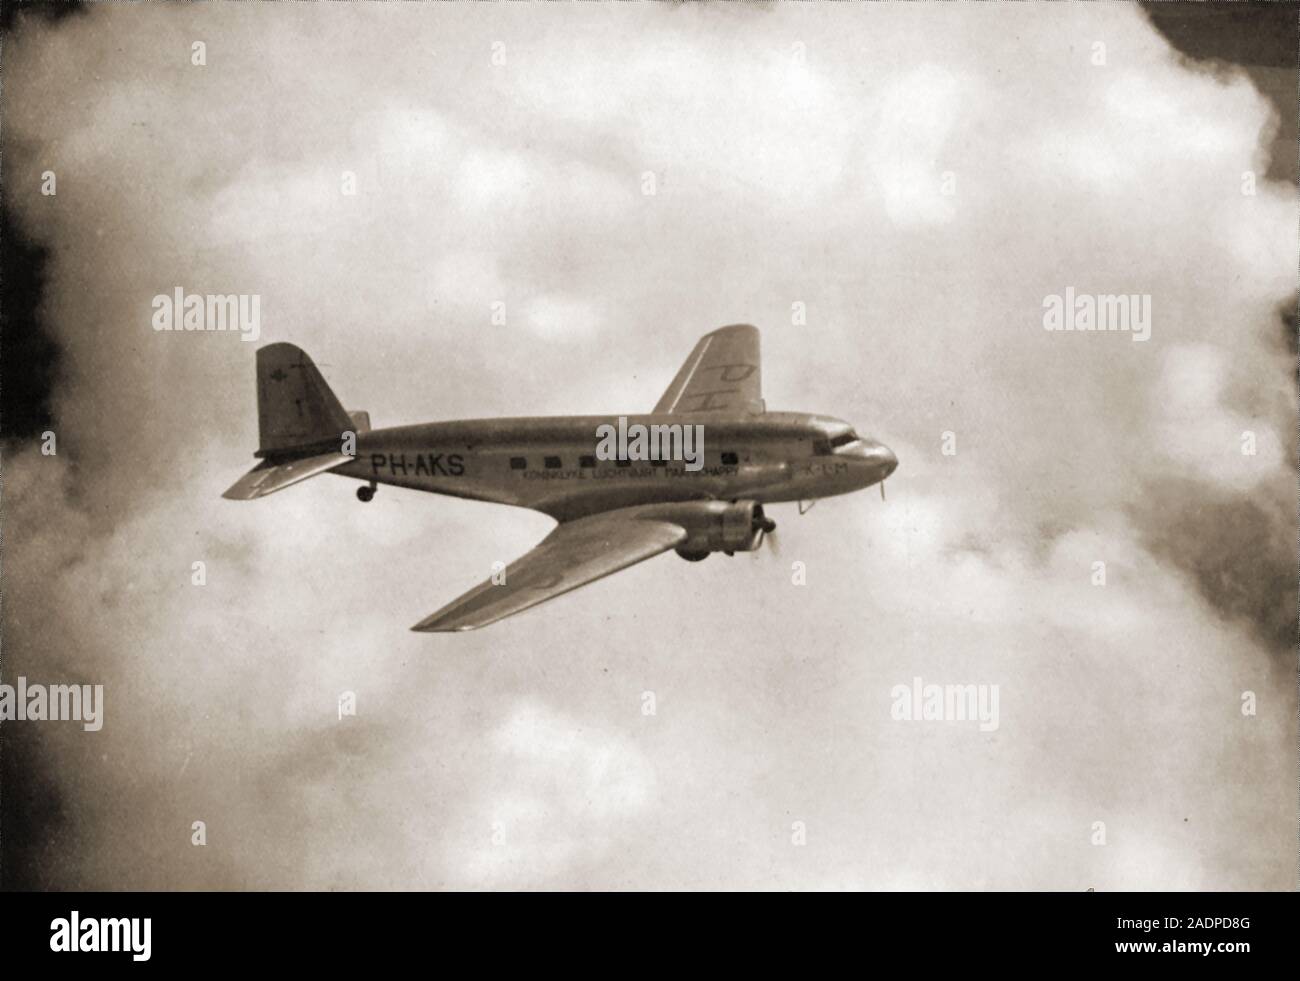 A  vintage 1936 photograph of a Sperwer (Sparrow Hawk) KLM passenger plane in flight on the Amsterdam to Batavia (Jakarta)  Route Stock Photo